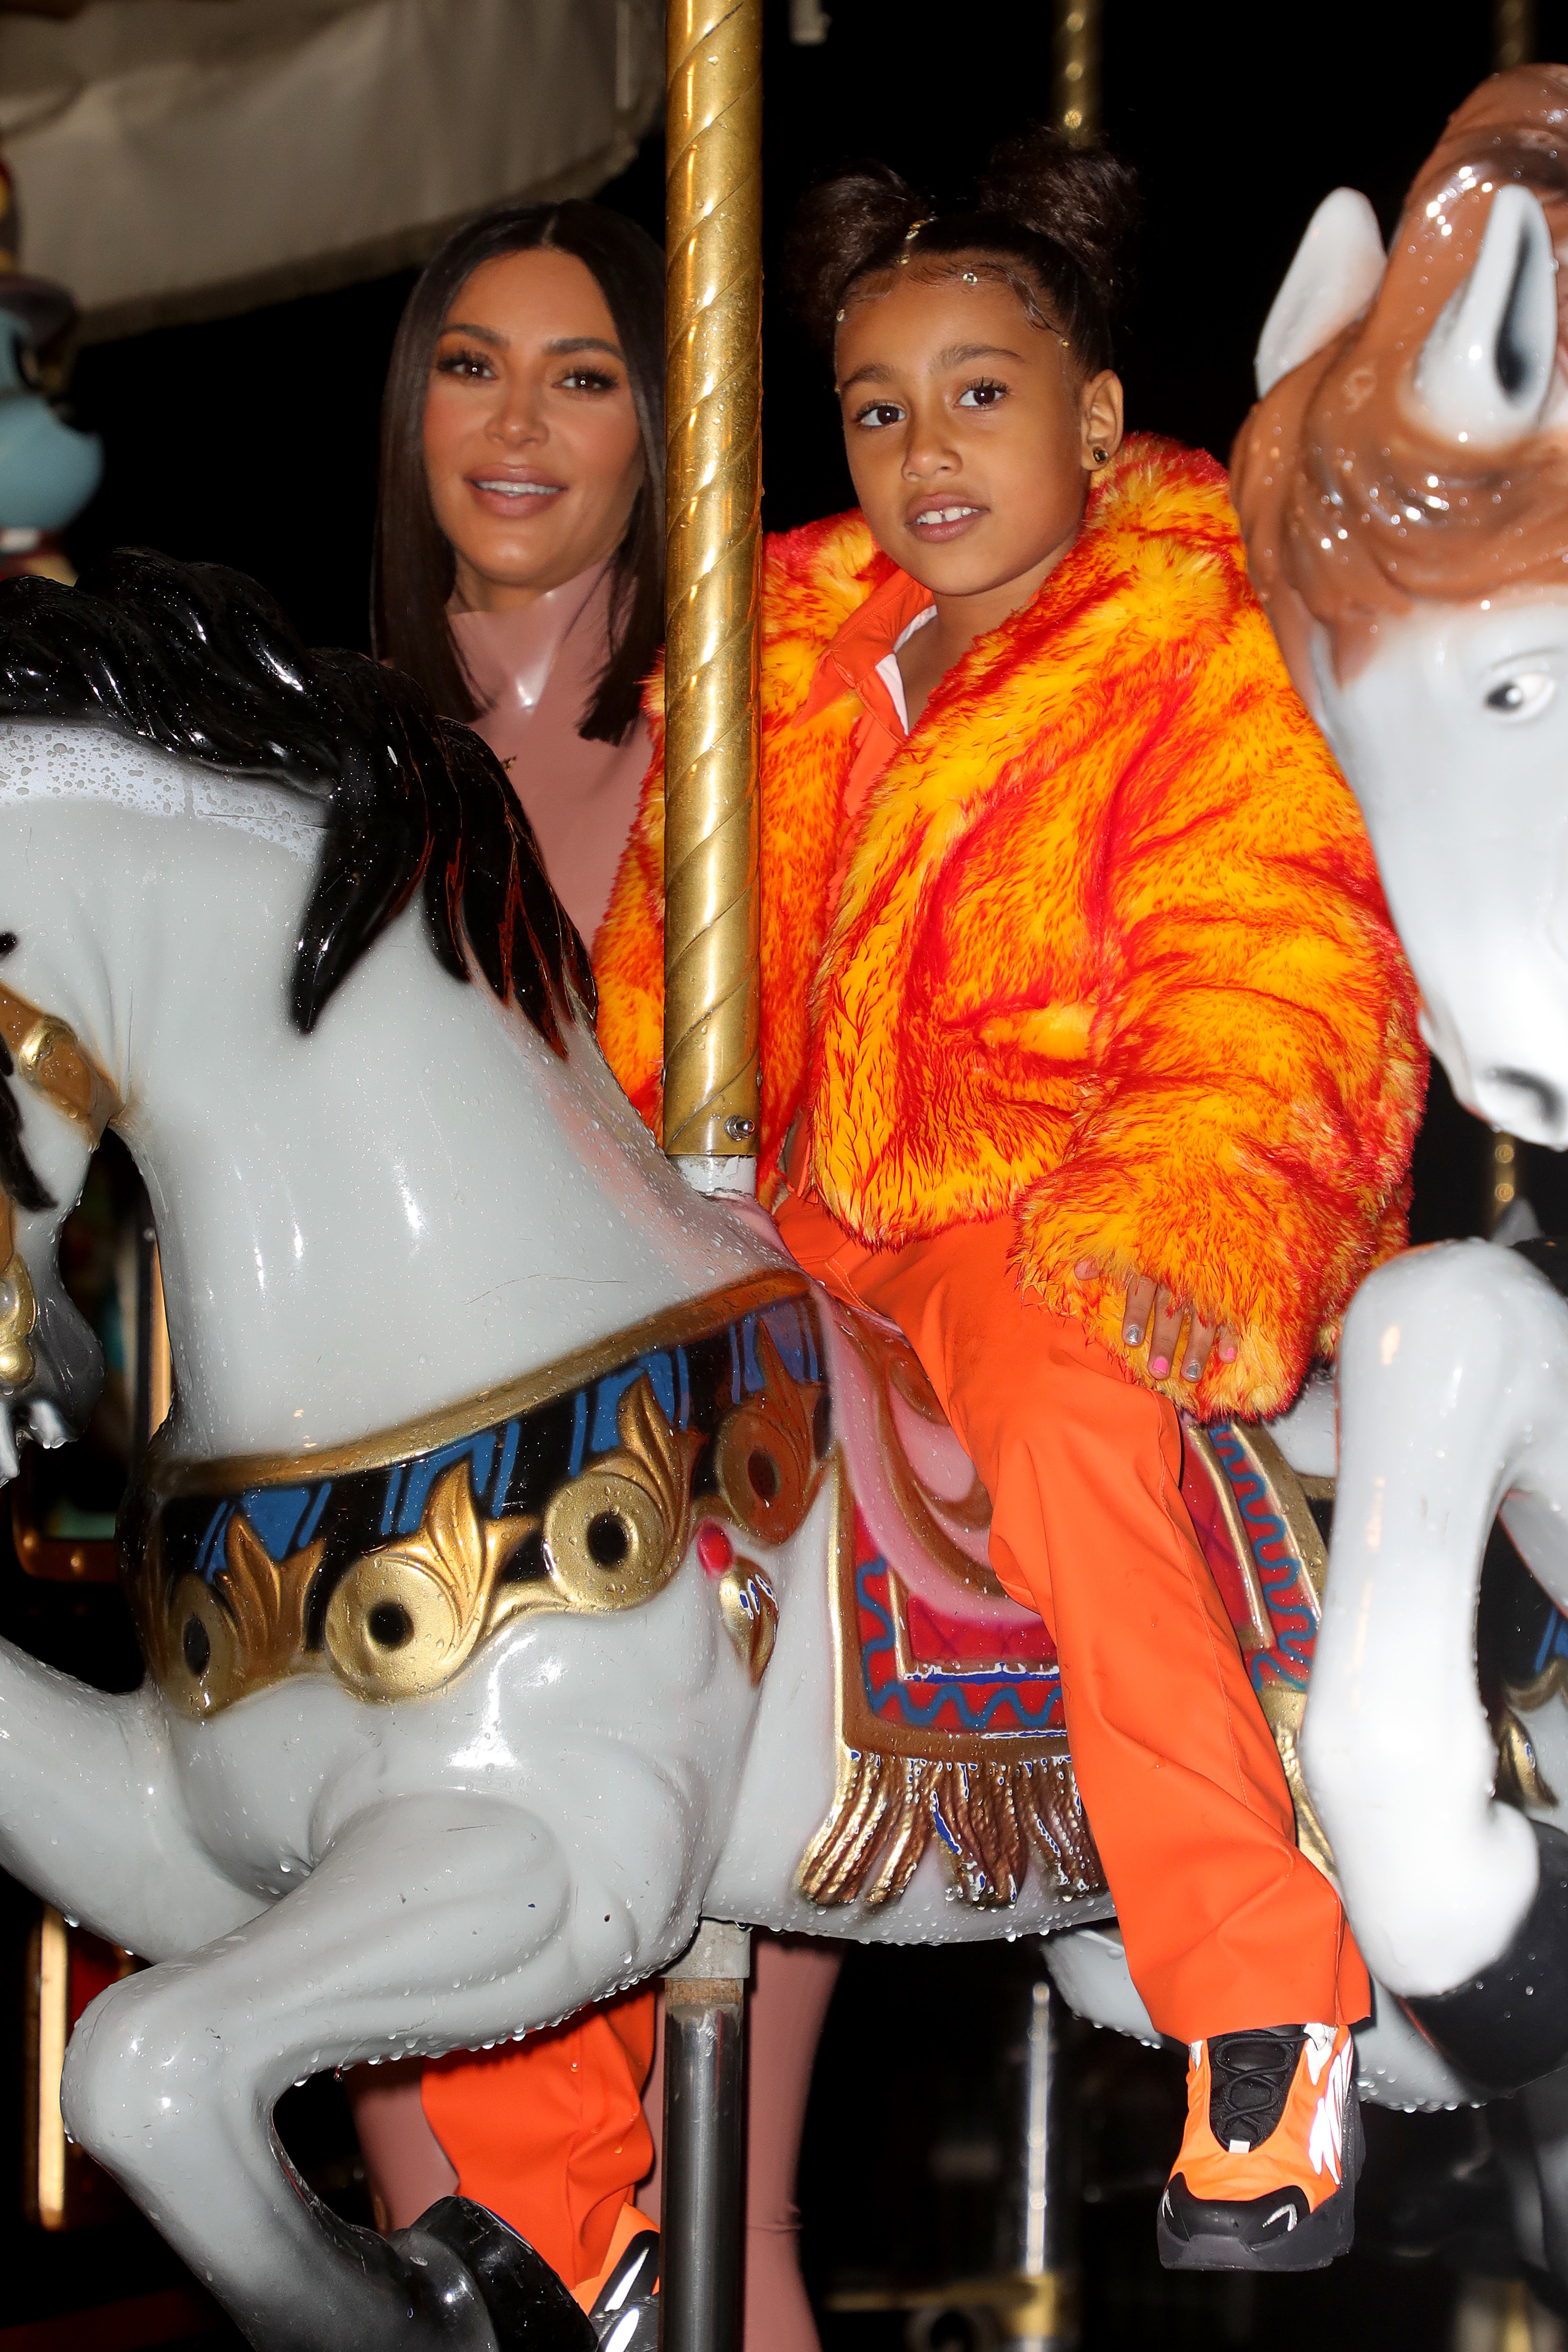 Kim standing next to North who&#x27;s riding a merry-go-round